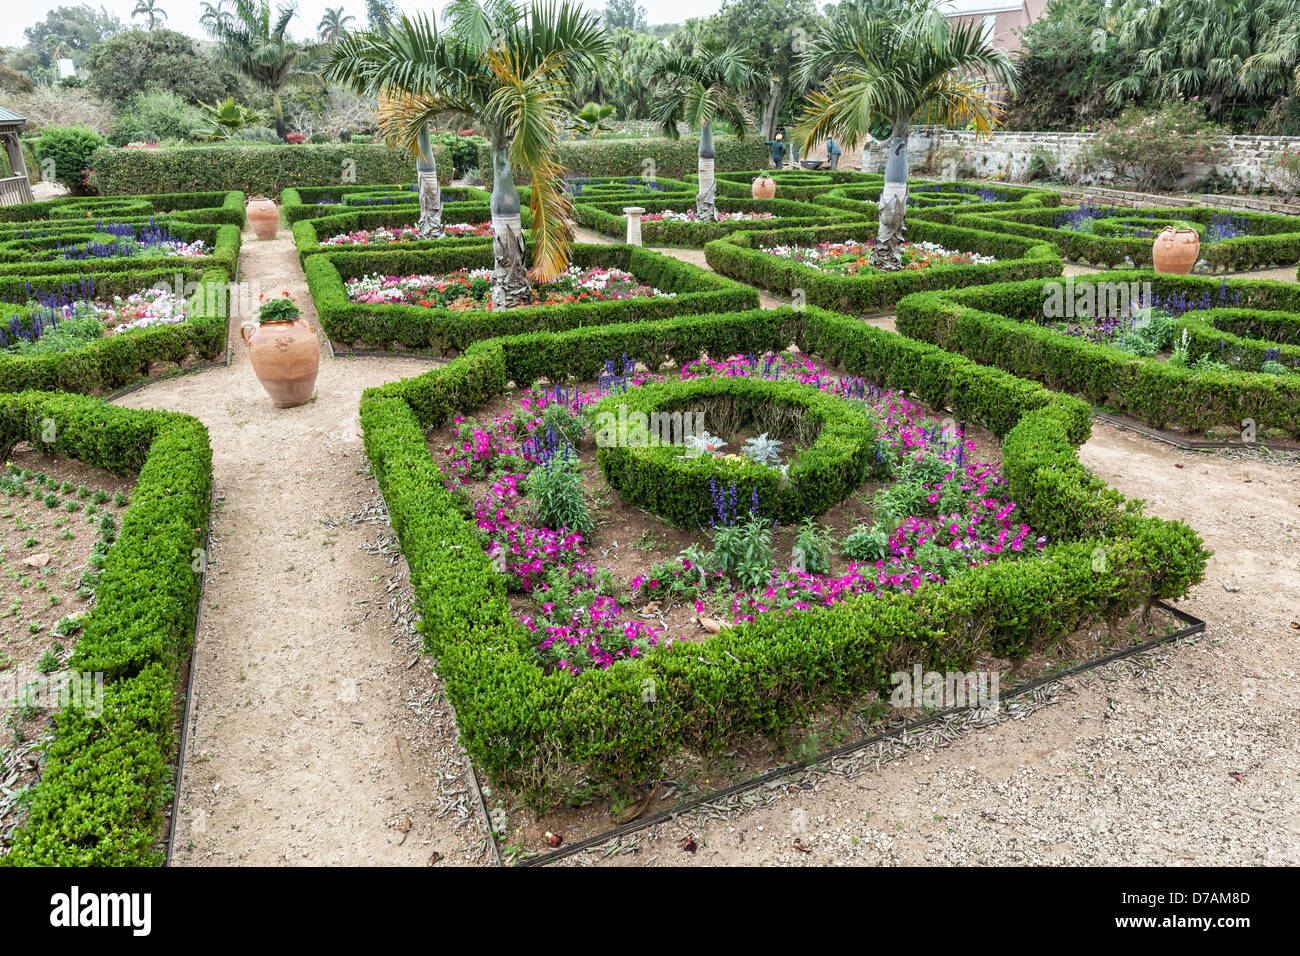 Large clay planters and clipped boxwood hedges are part of the formal gardens in the Bermuda Botanical Gardens. Stock Photo